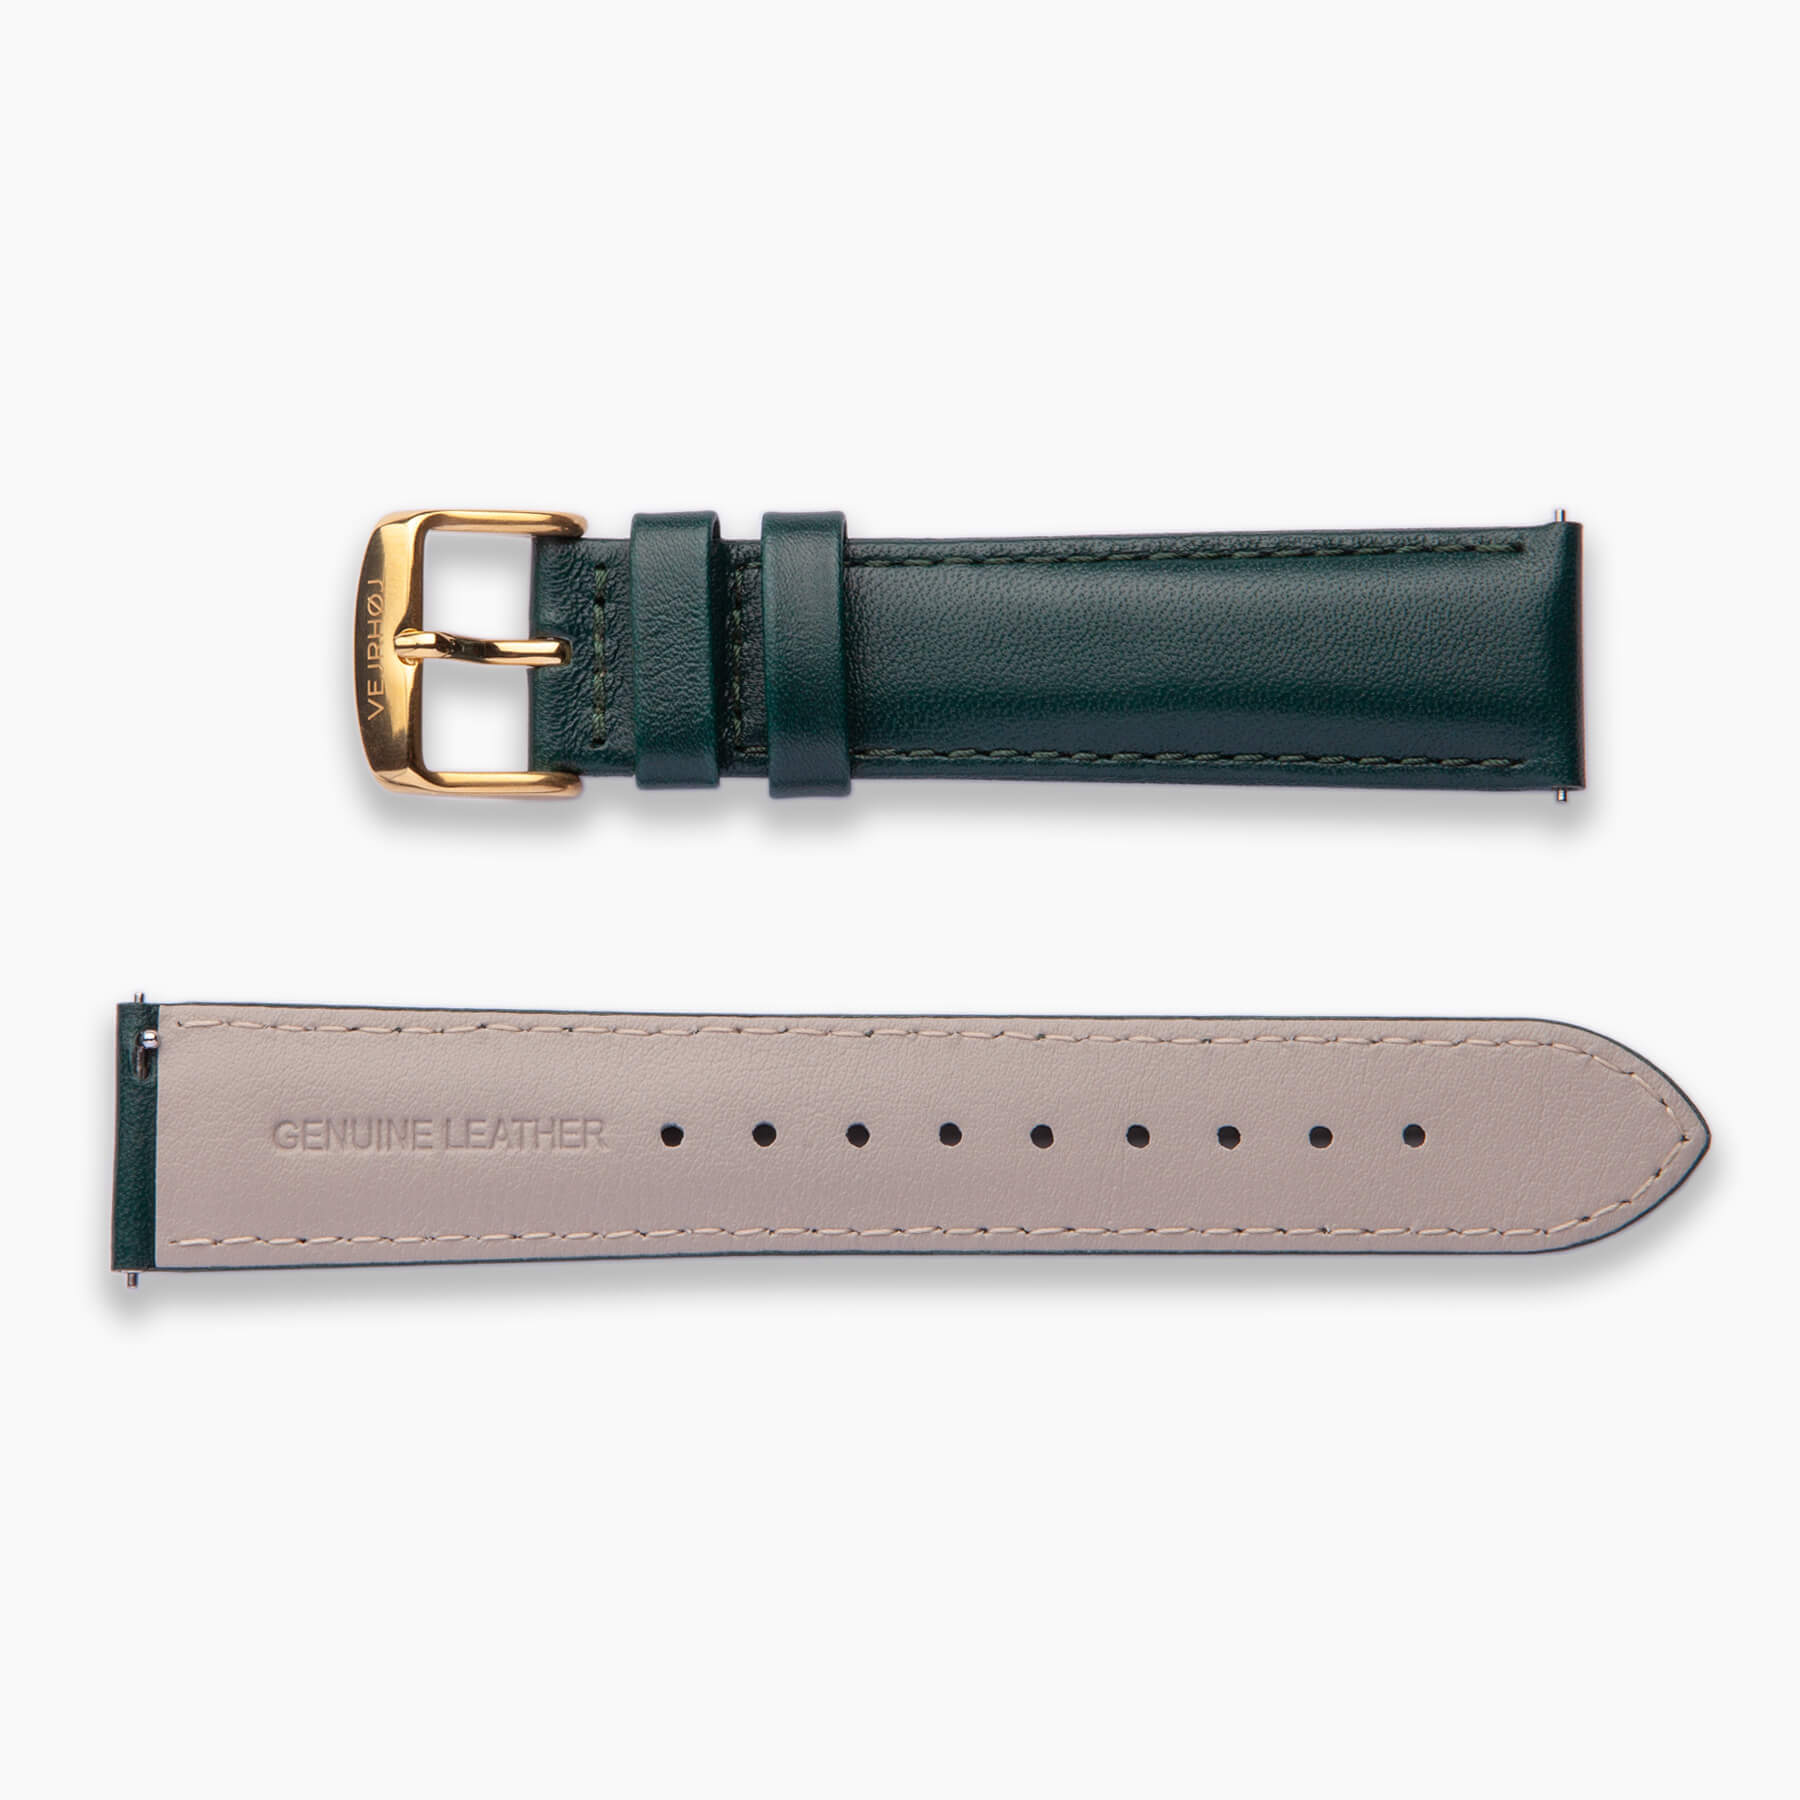 Green strap with golden buckle